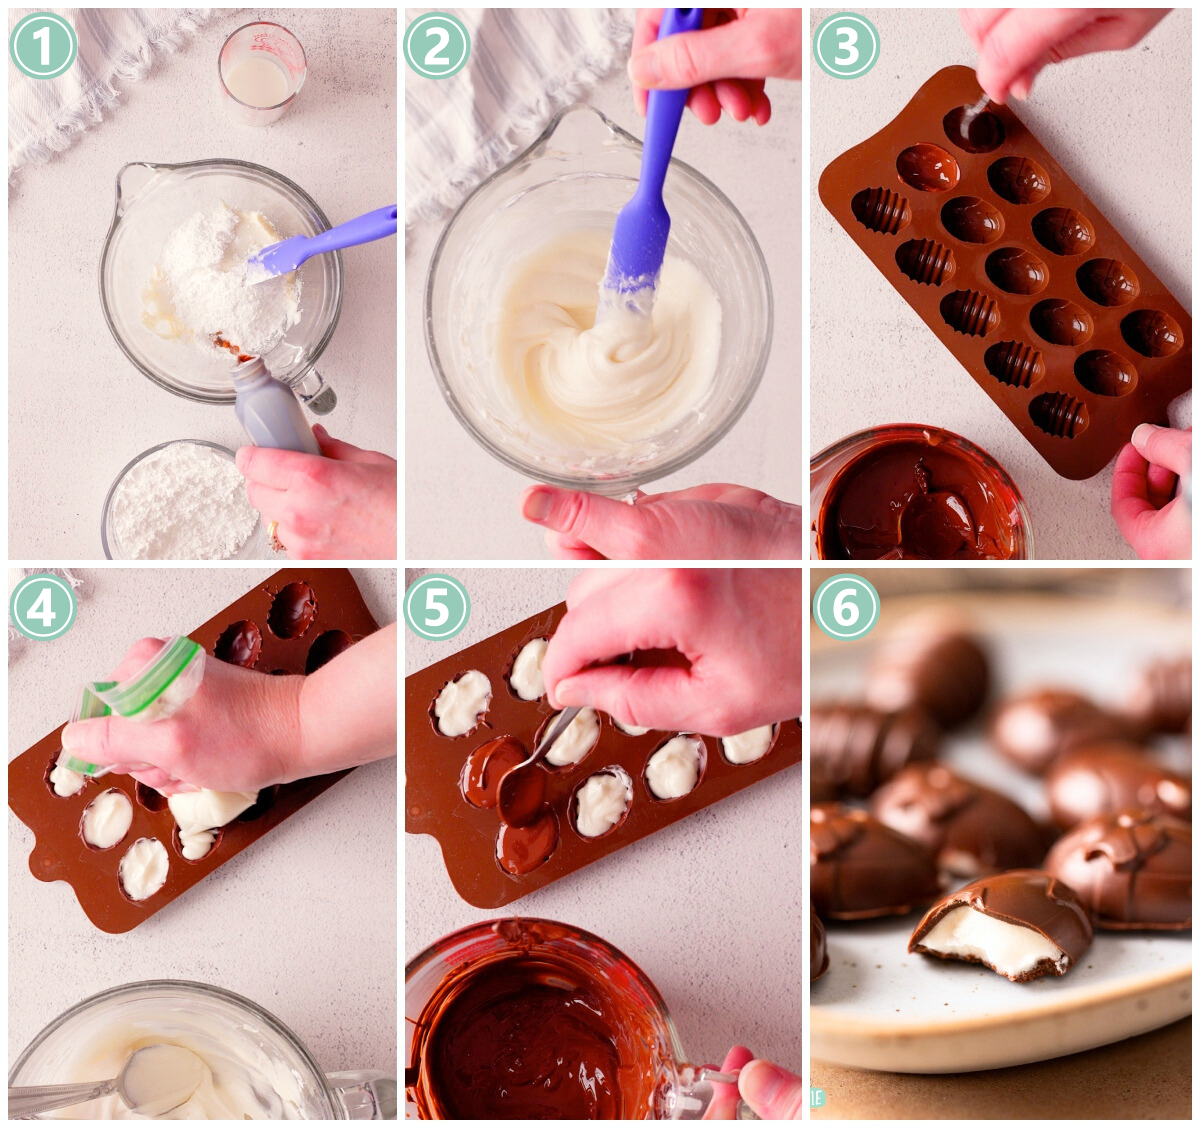 Step-by-step process of making cream eggs with a chocolate candy filling.